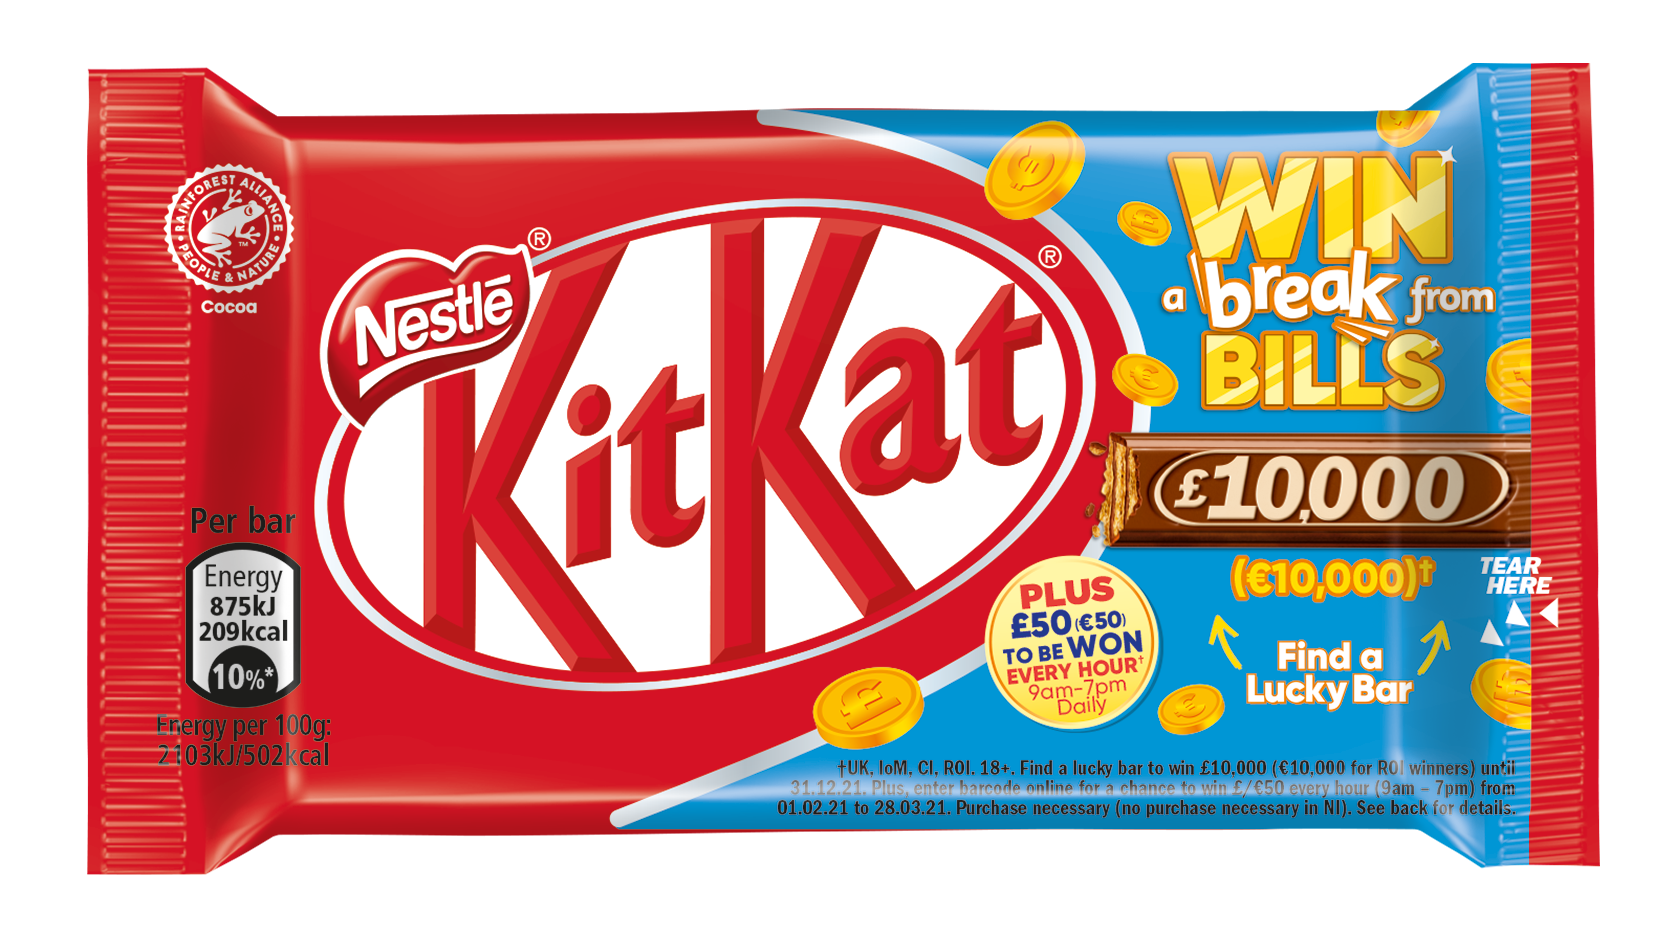 KitKat kicks off new year with instant win promotion